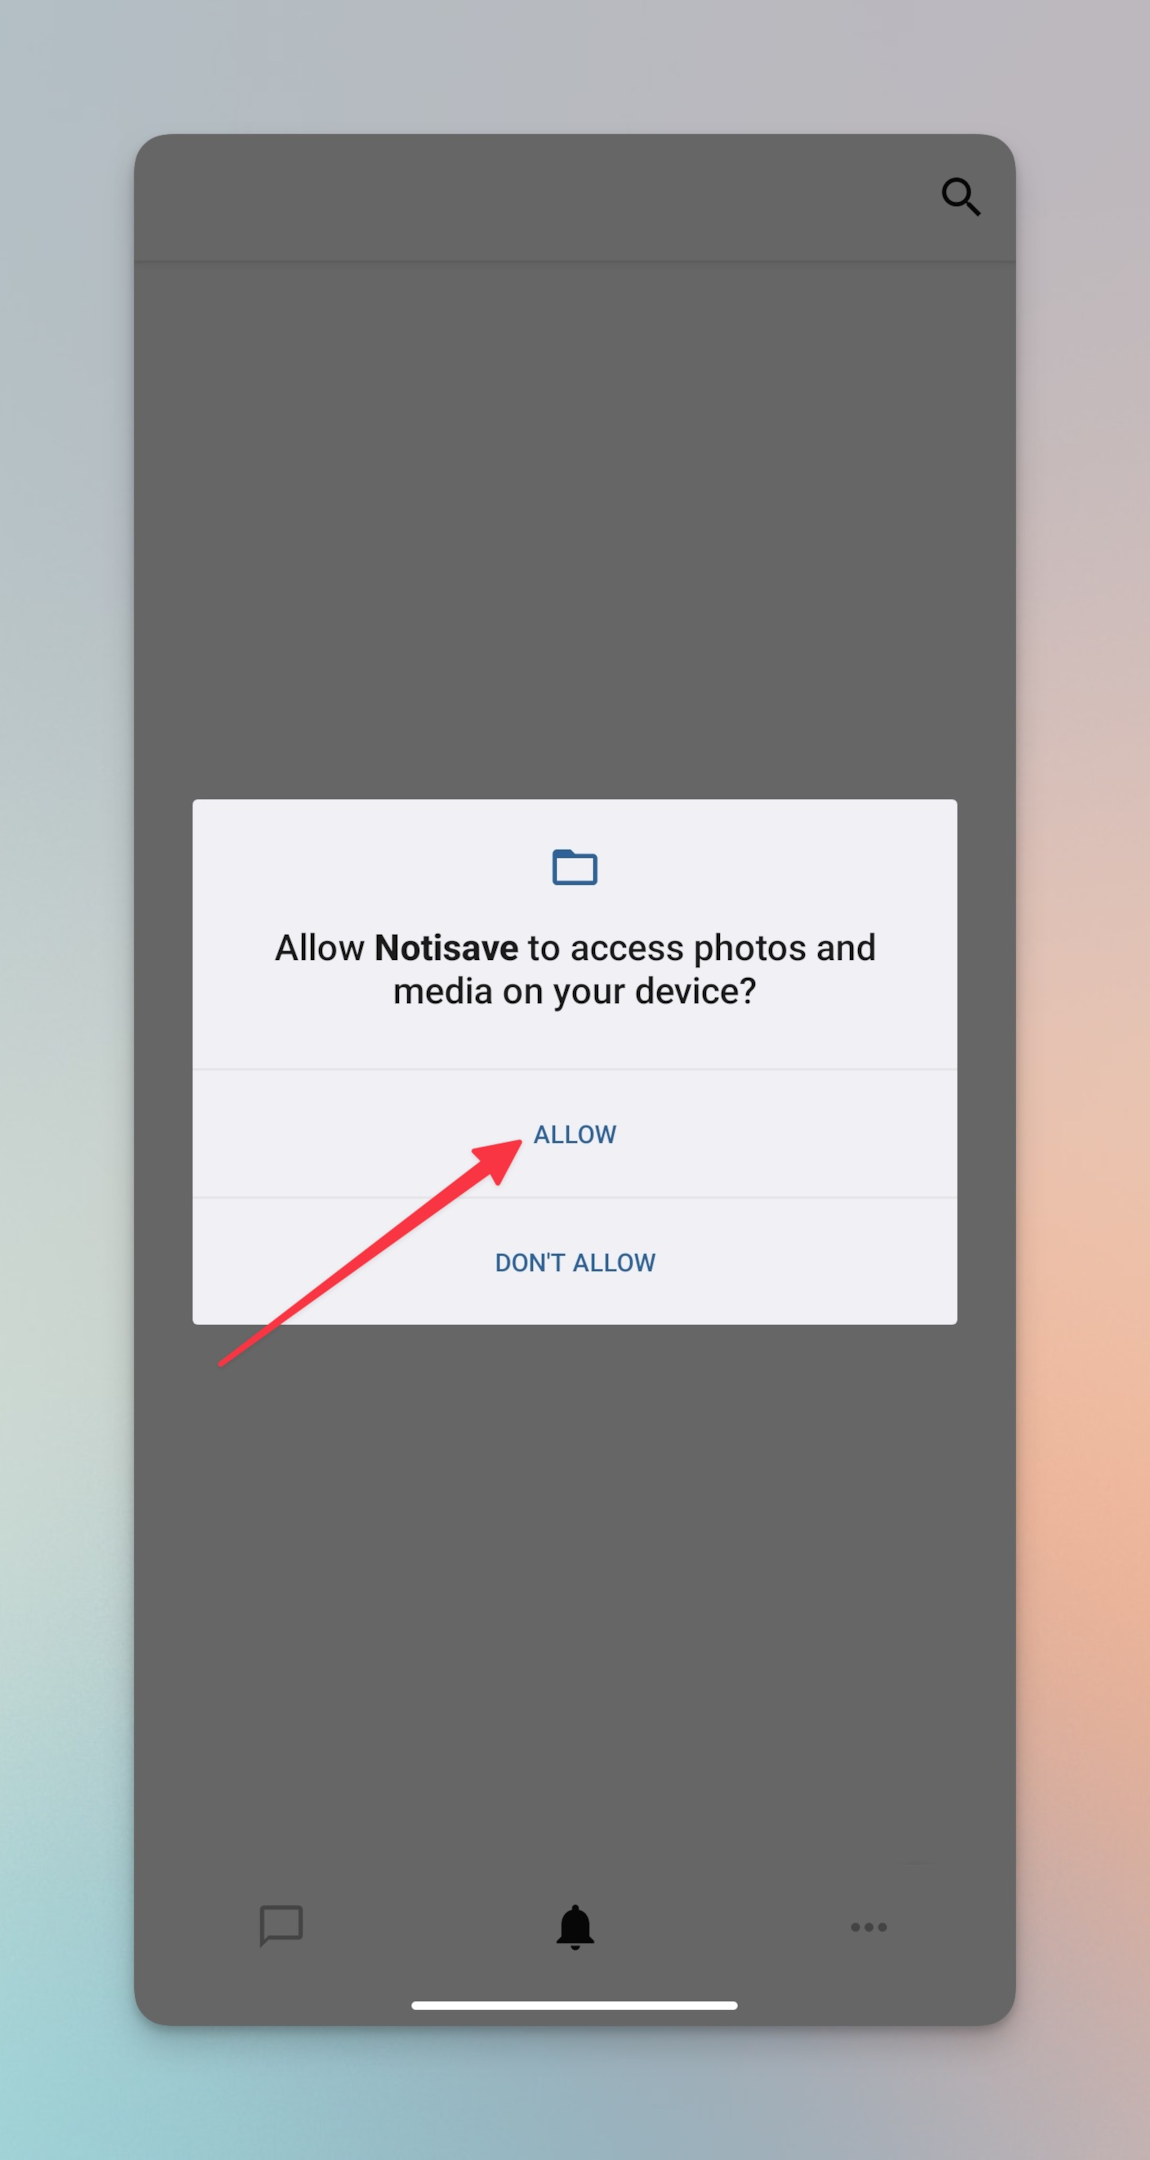 Remote.tools points to Allow button to allow Notisave to access media on your Android phone